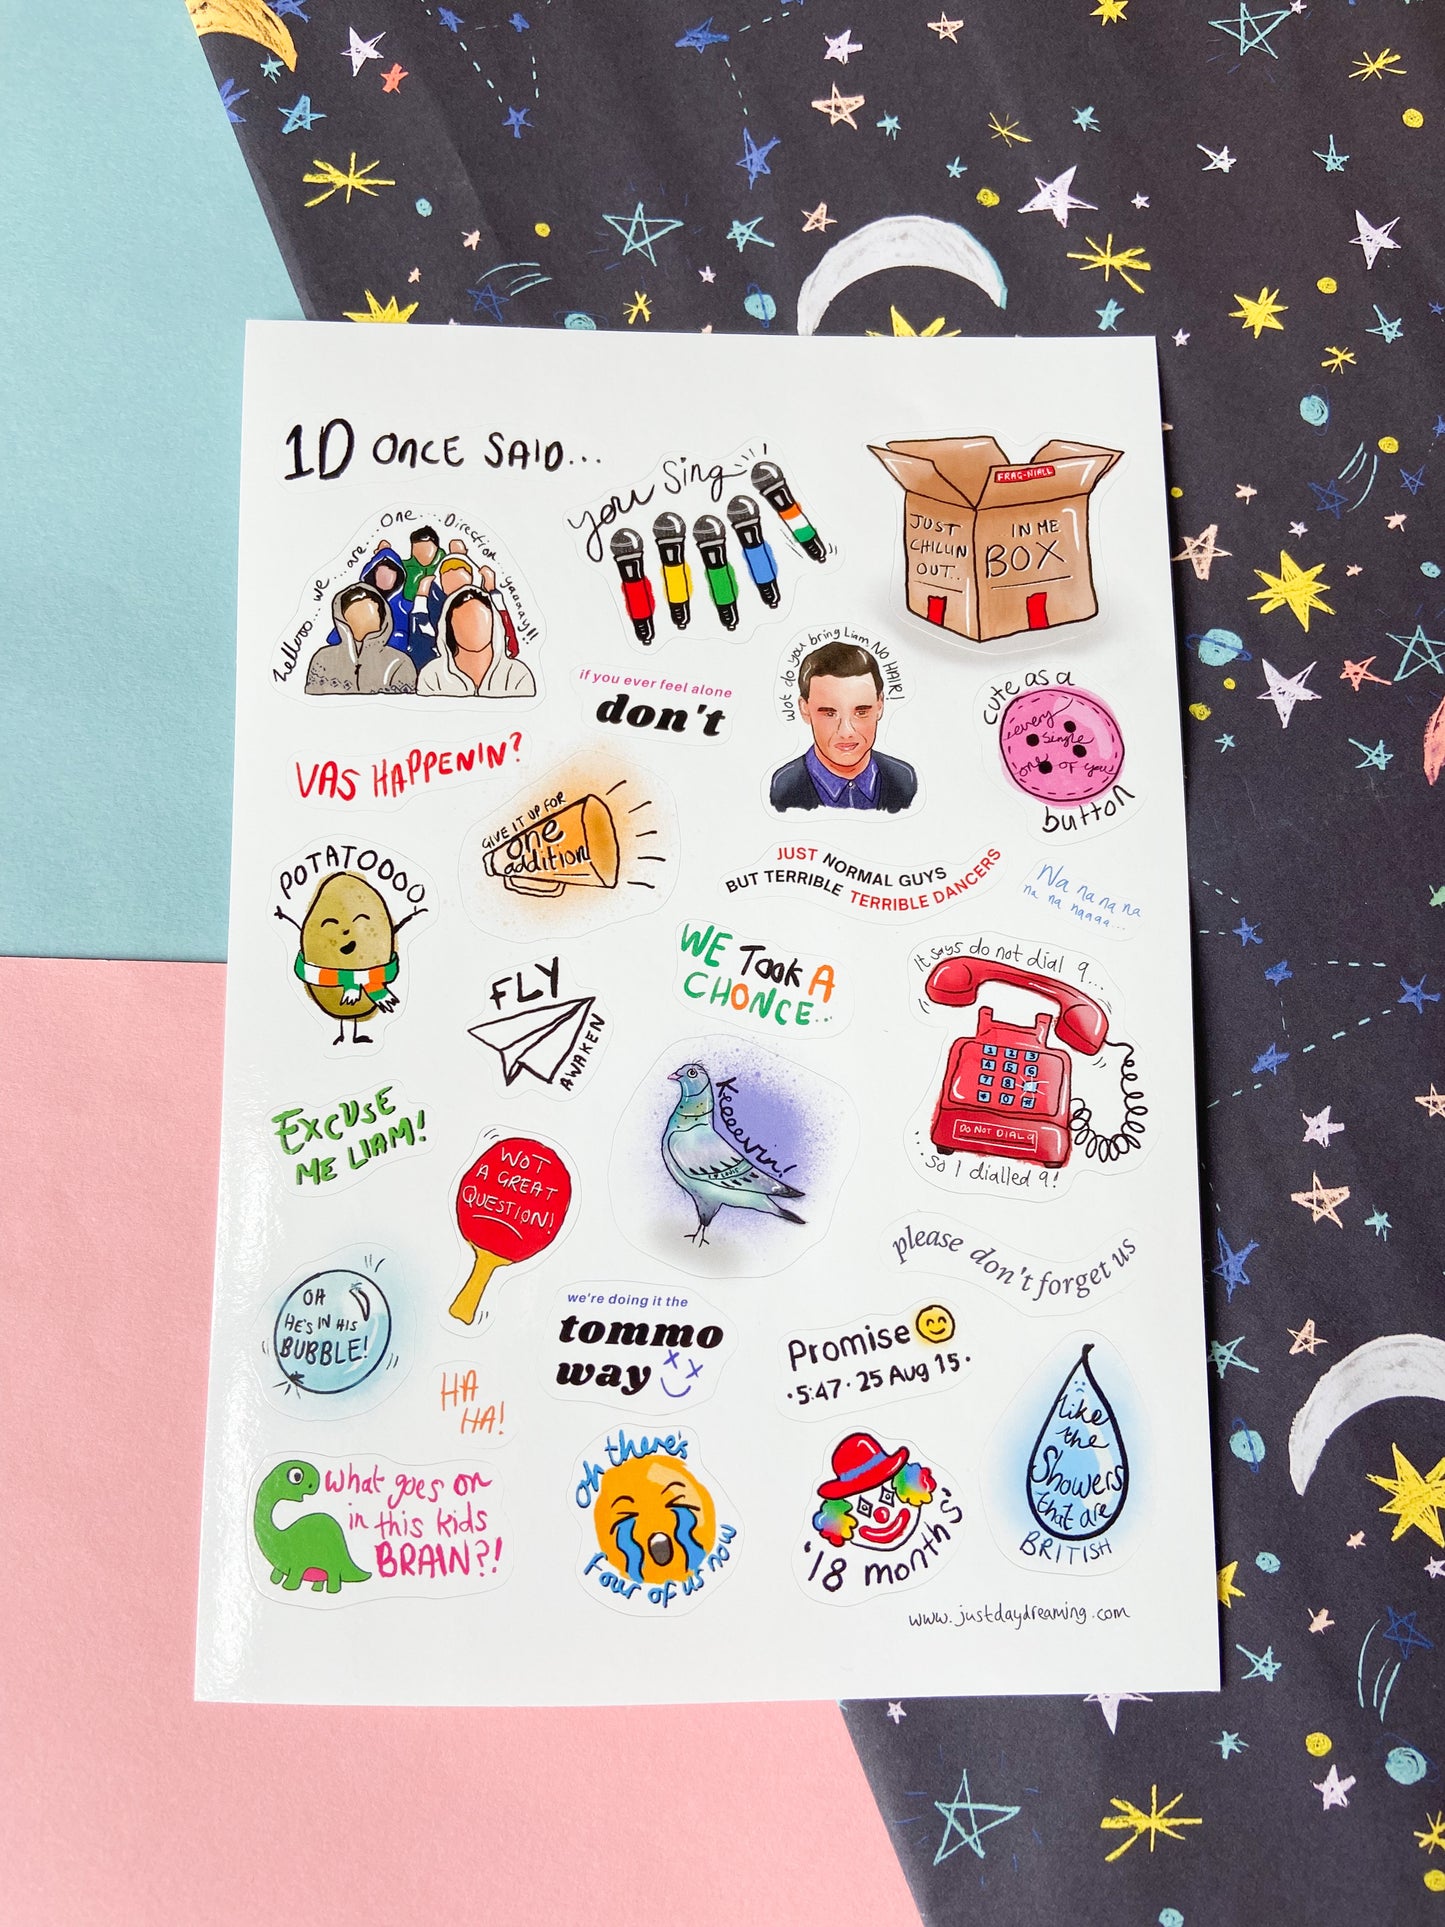 Harry Once Said Sticker Sets, Iconic Quotes